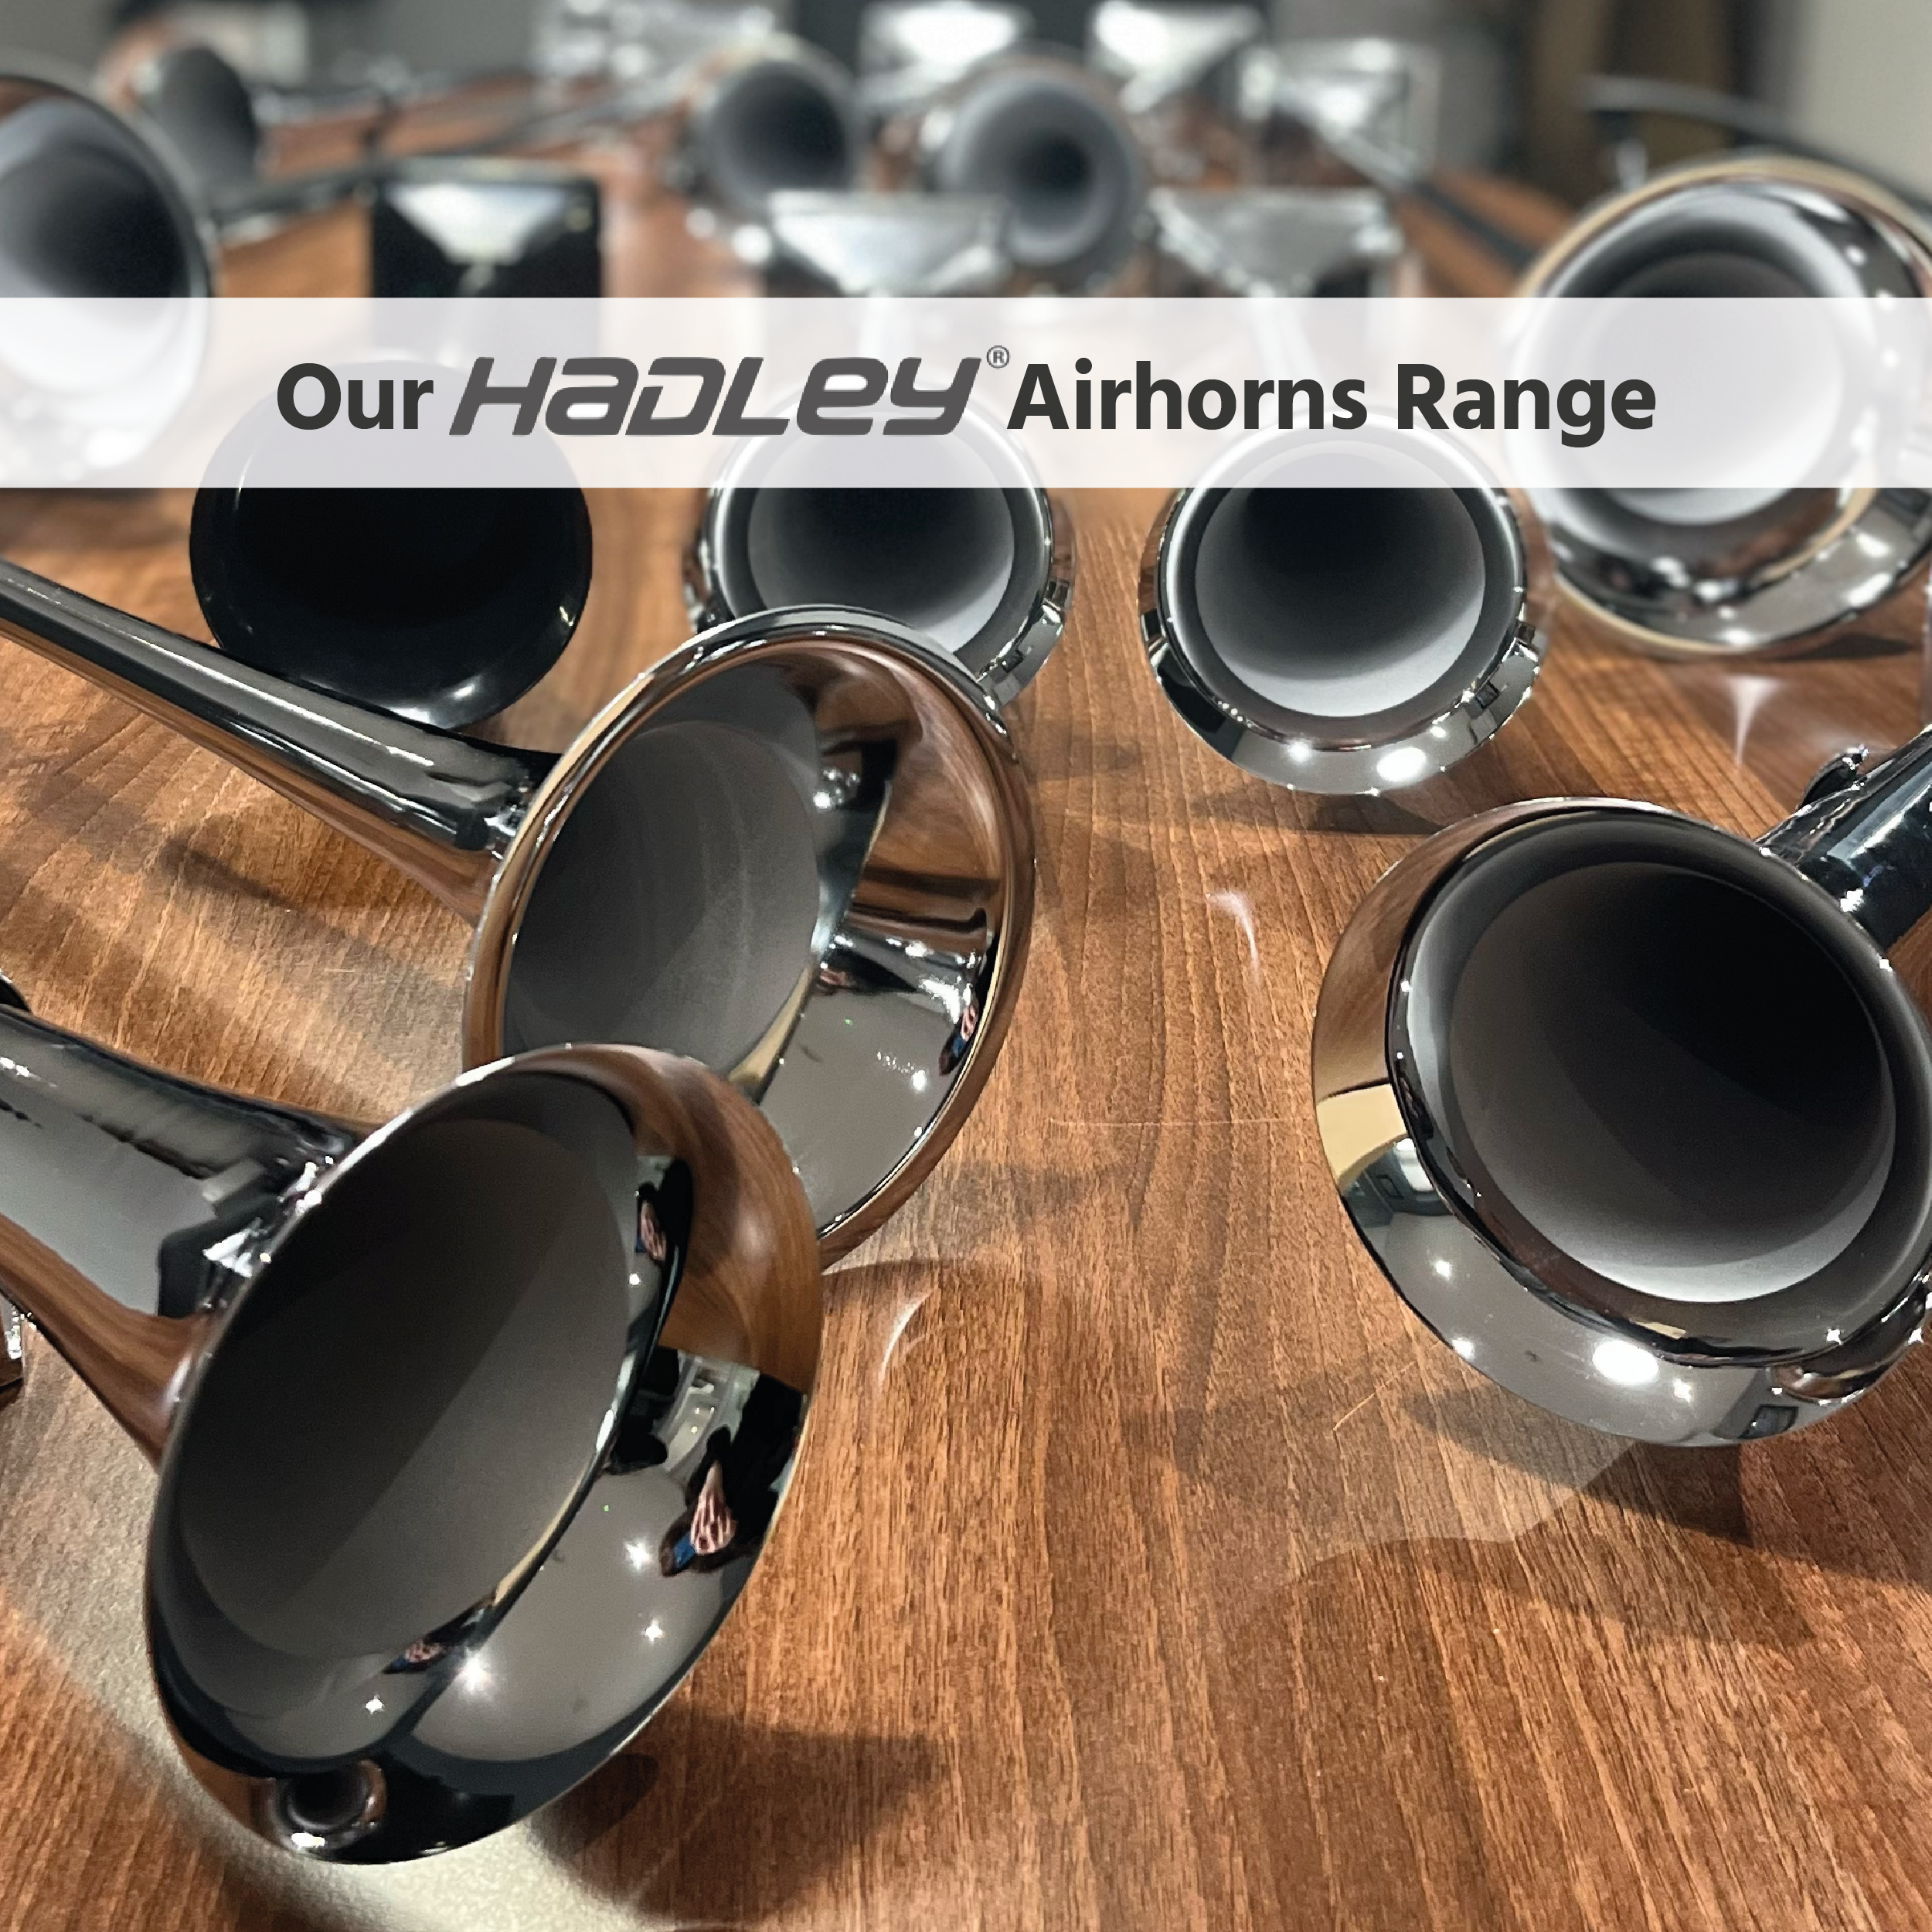 Image of Our Hadley Airhorns Range